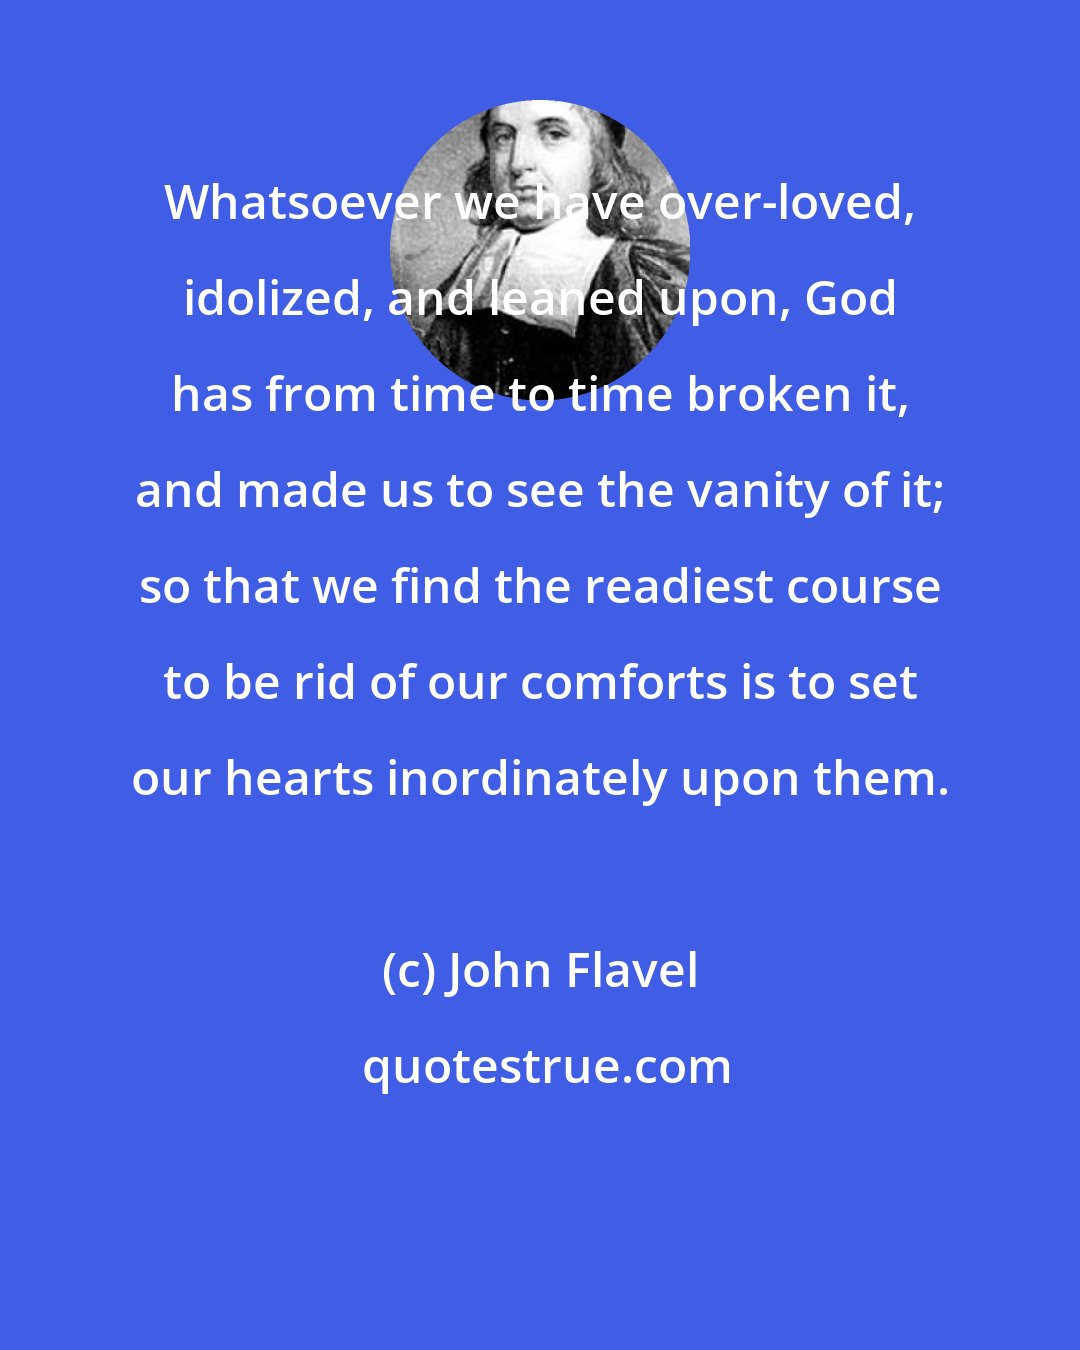 John Flavel: Whatsoever we have over-loved, idolized, and leaned upon, God has from time to time broken it, and made us to see the vanity of it; so that we find the readiest course to be rid of our comforts is to set our hearts inordinately upon them.